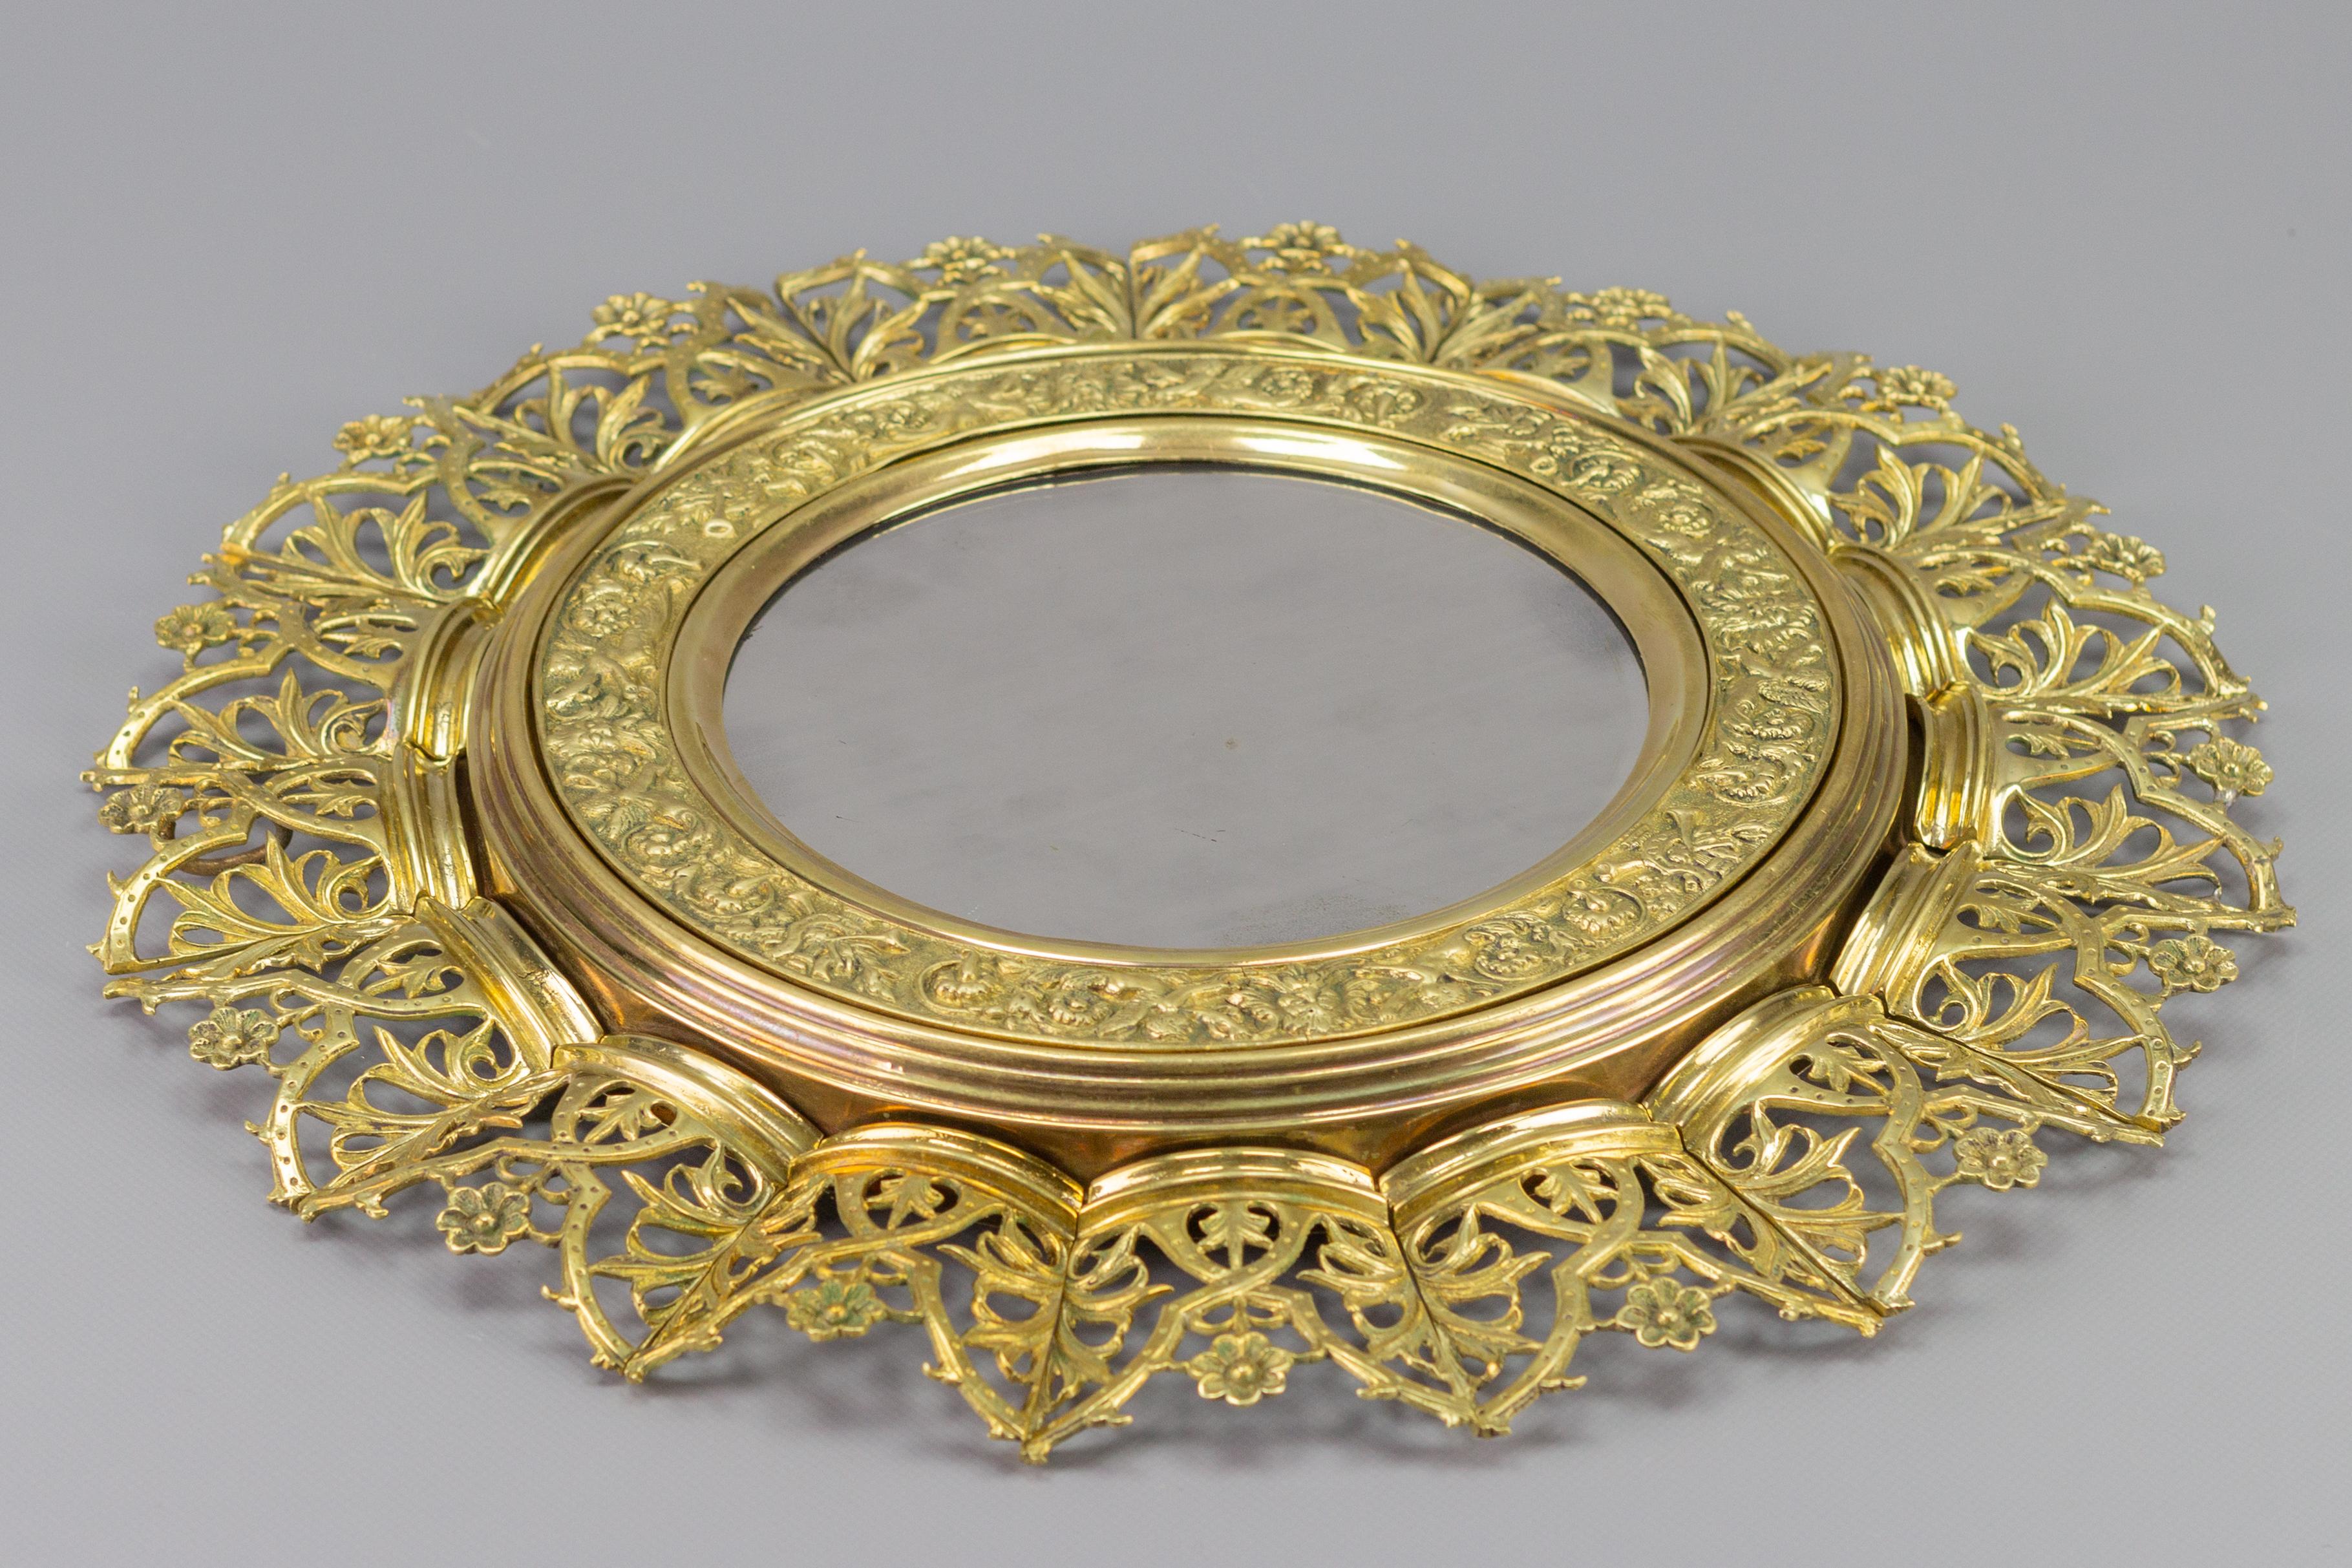 Antique Circular Bronze and Brass Mirror in Sunburst Shape, Early 20th Century For Sale 11